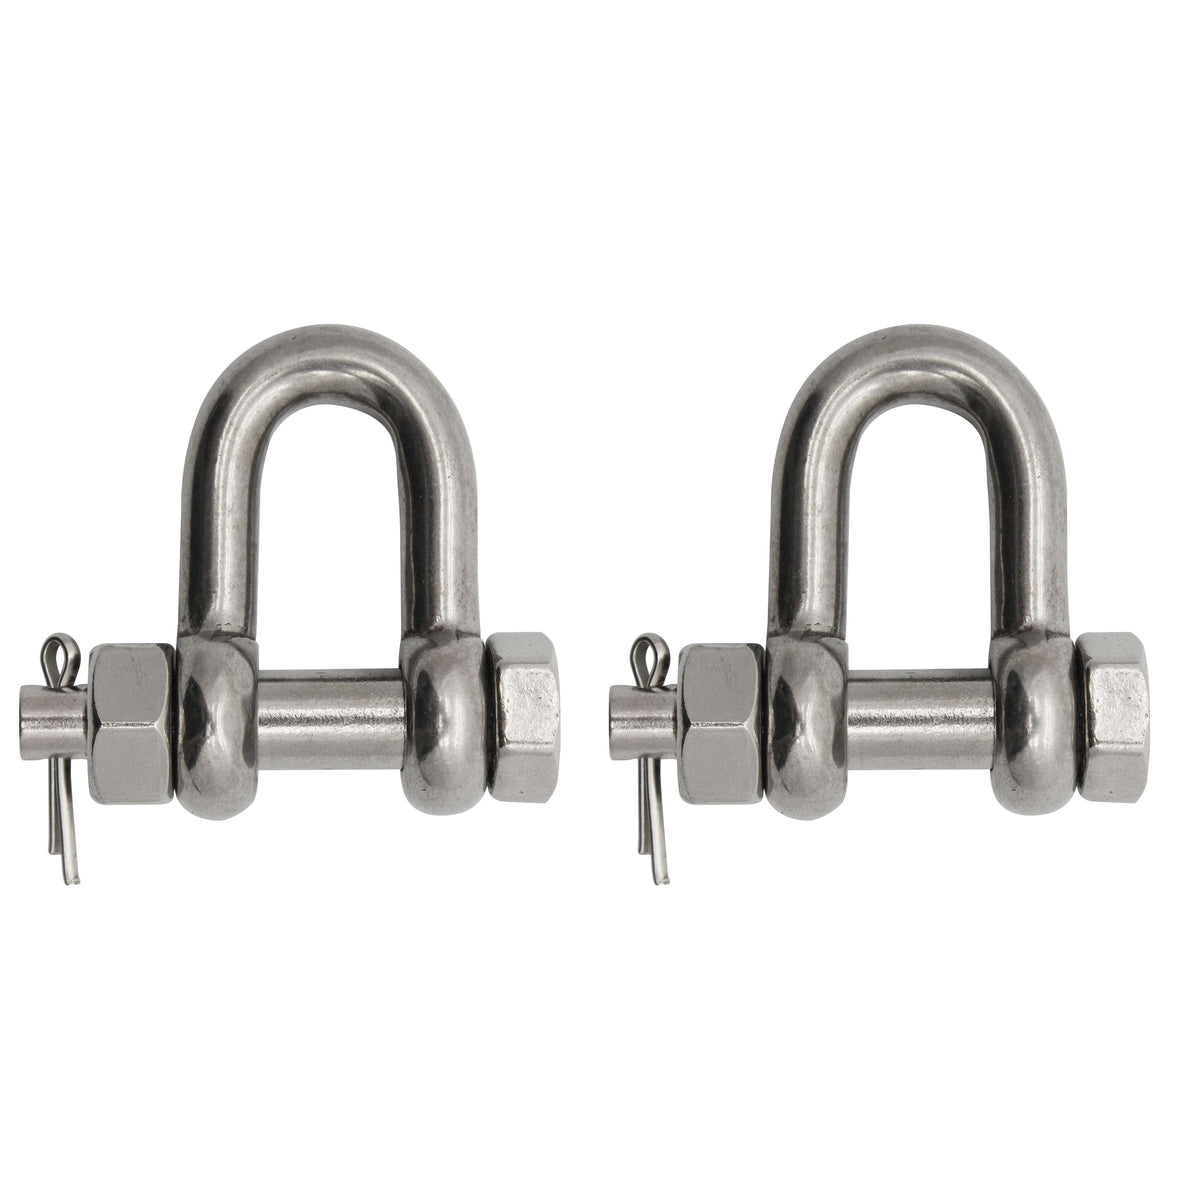 Extreme Max SS Bolt-Type Chain Shackle 3/4" 2-pk #3006.8357.2